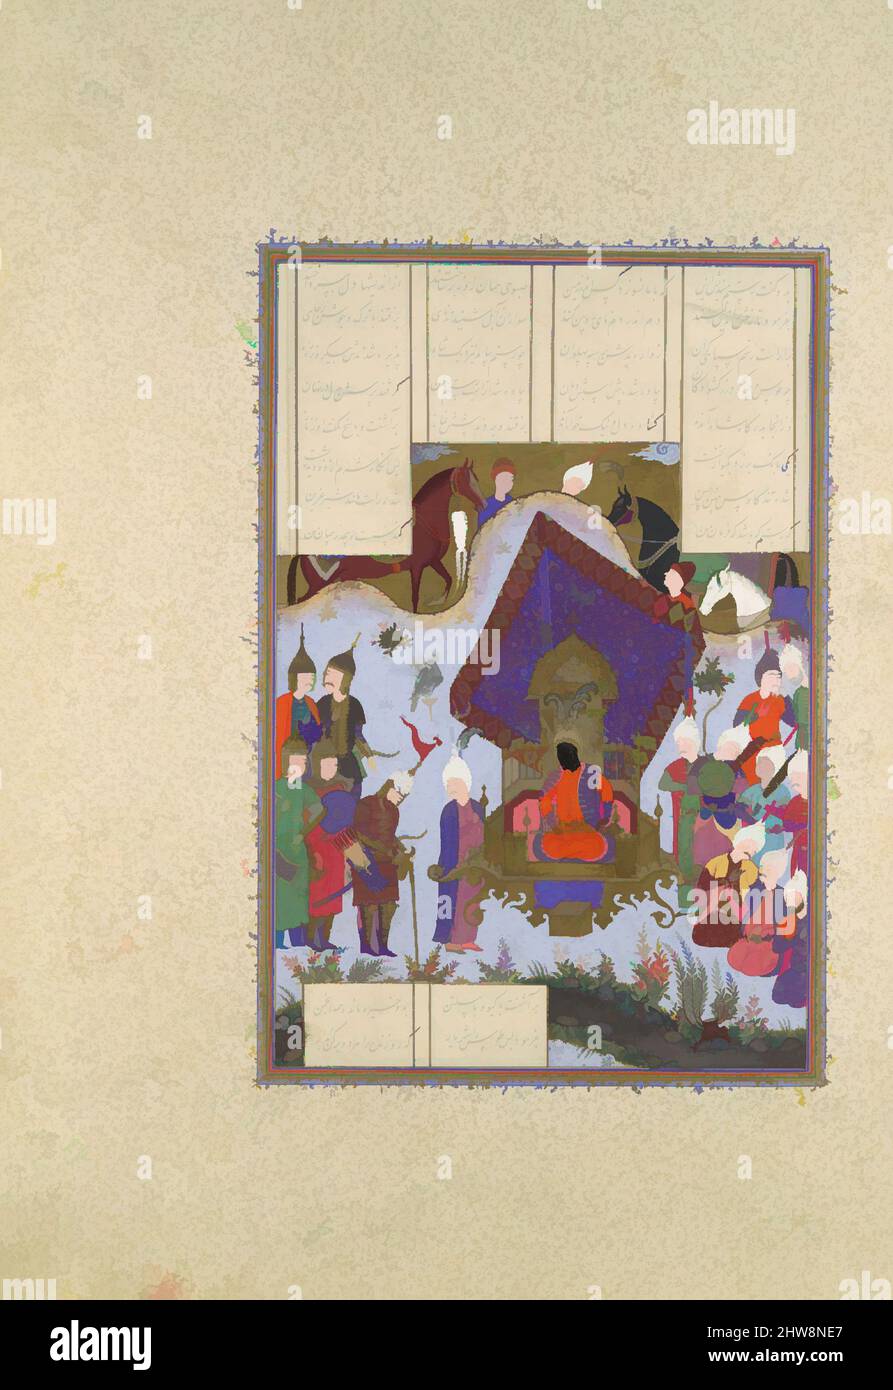 Art inspired by Rustam Pained Before Kai Kavus', Folio 146r from the Shahnama (Book of Kings) of Shah Tahmasp, ca. 1525–30, Made in Iran, Tabriz, Opaque watercolor, ink, silver, and gold on paper, Painting: H. 11 3/16 x W. 7 9/16 in. (H. 28.4 x W. 19.2 cm), Codices, Painting attributed, Classic works modernized by Artotop with a splash of modernity. Shapes, color and value, eye-catching visual impact on art. Emotions through freedom of artworks in a contemporary way. A timeless message pursuing a wildly creative new direction. Artists turning to the digital medium and creating the Artotop NFT Stock Photo